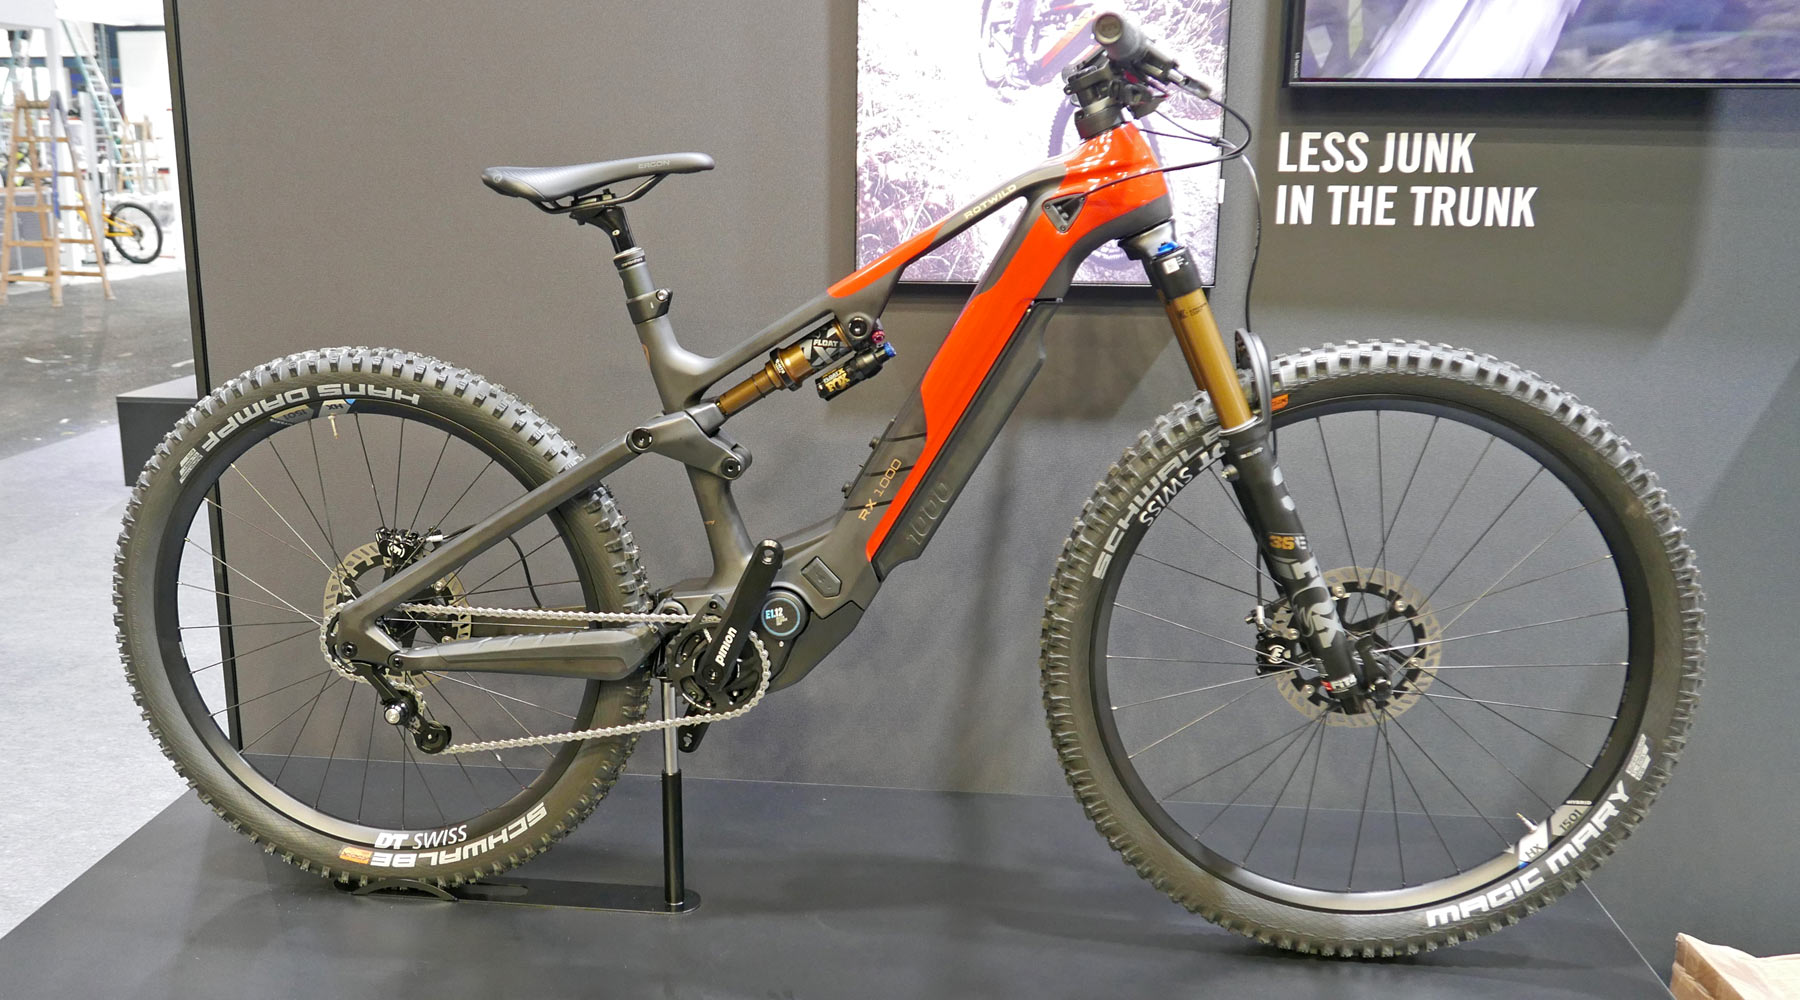 Eurobike-2023-bicycle-industry-tradeshow_Rotwild-RX1000-Pinion-eMTB-has-less-junk-in-the-trunk.jpg